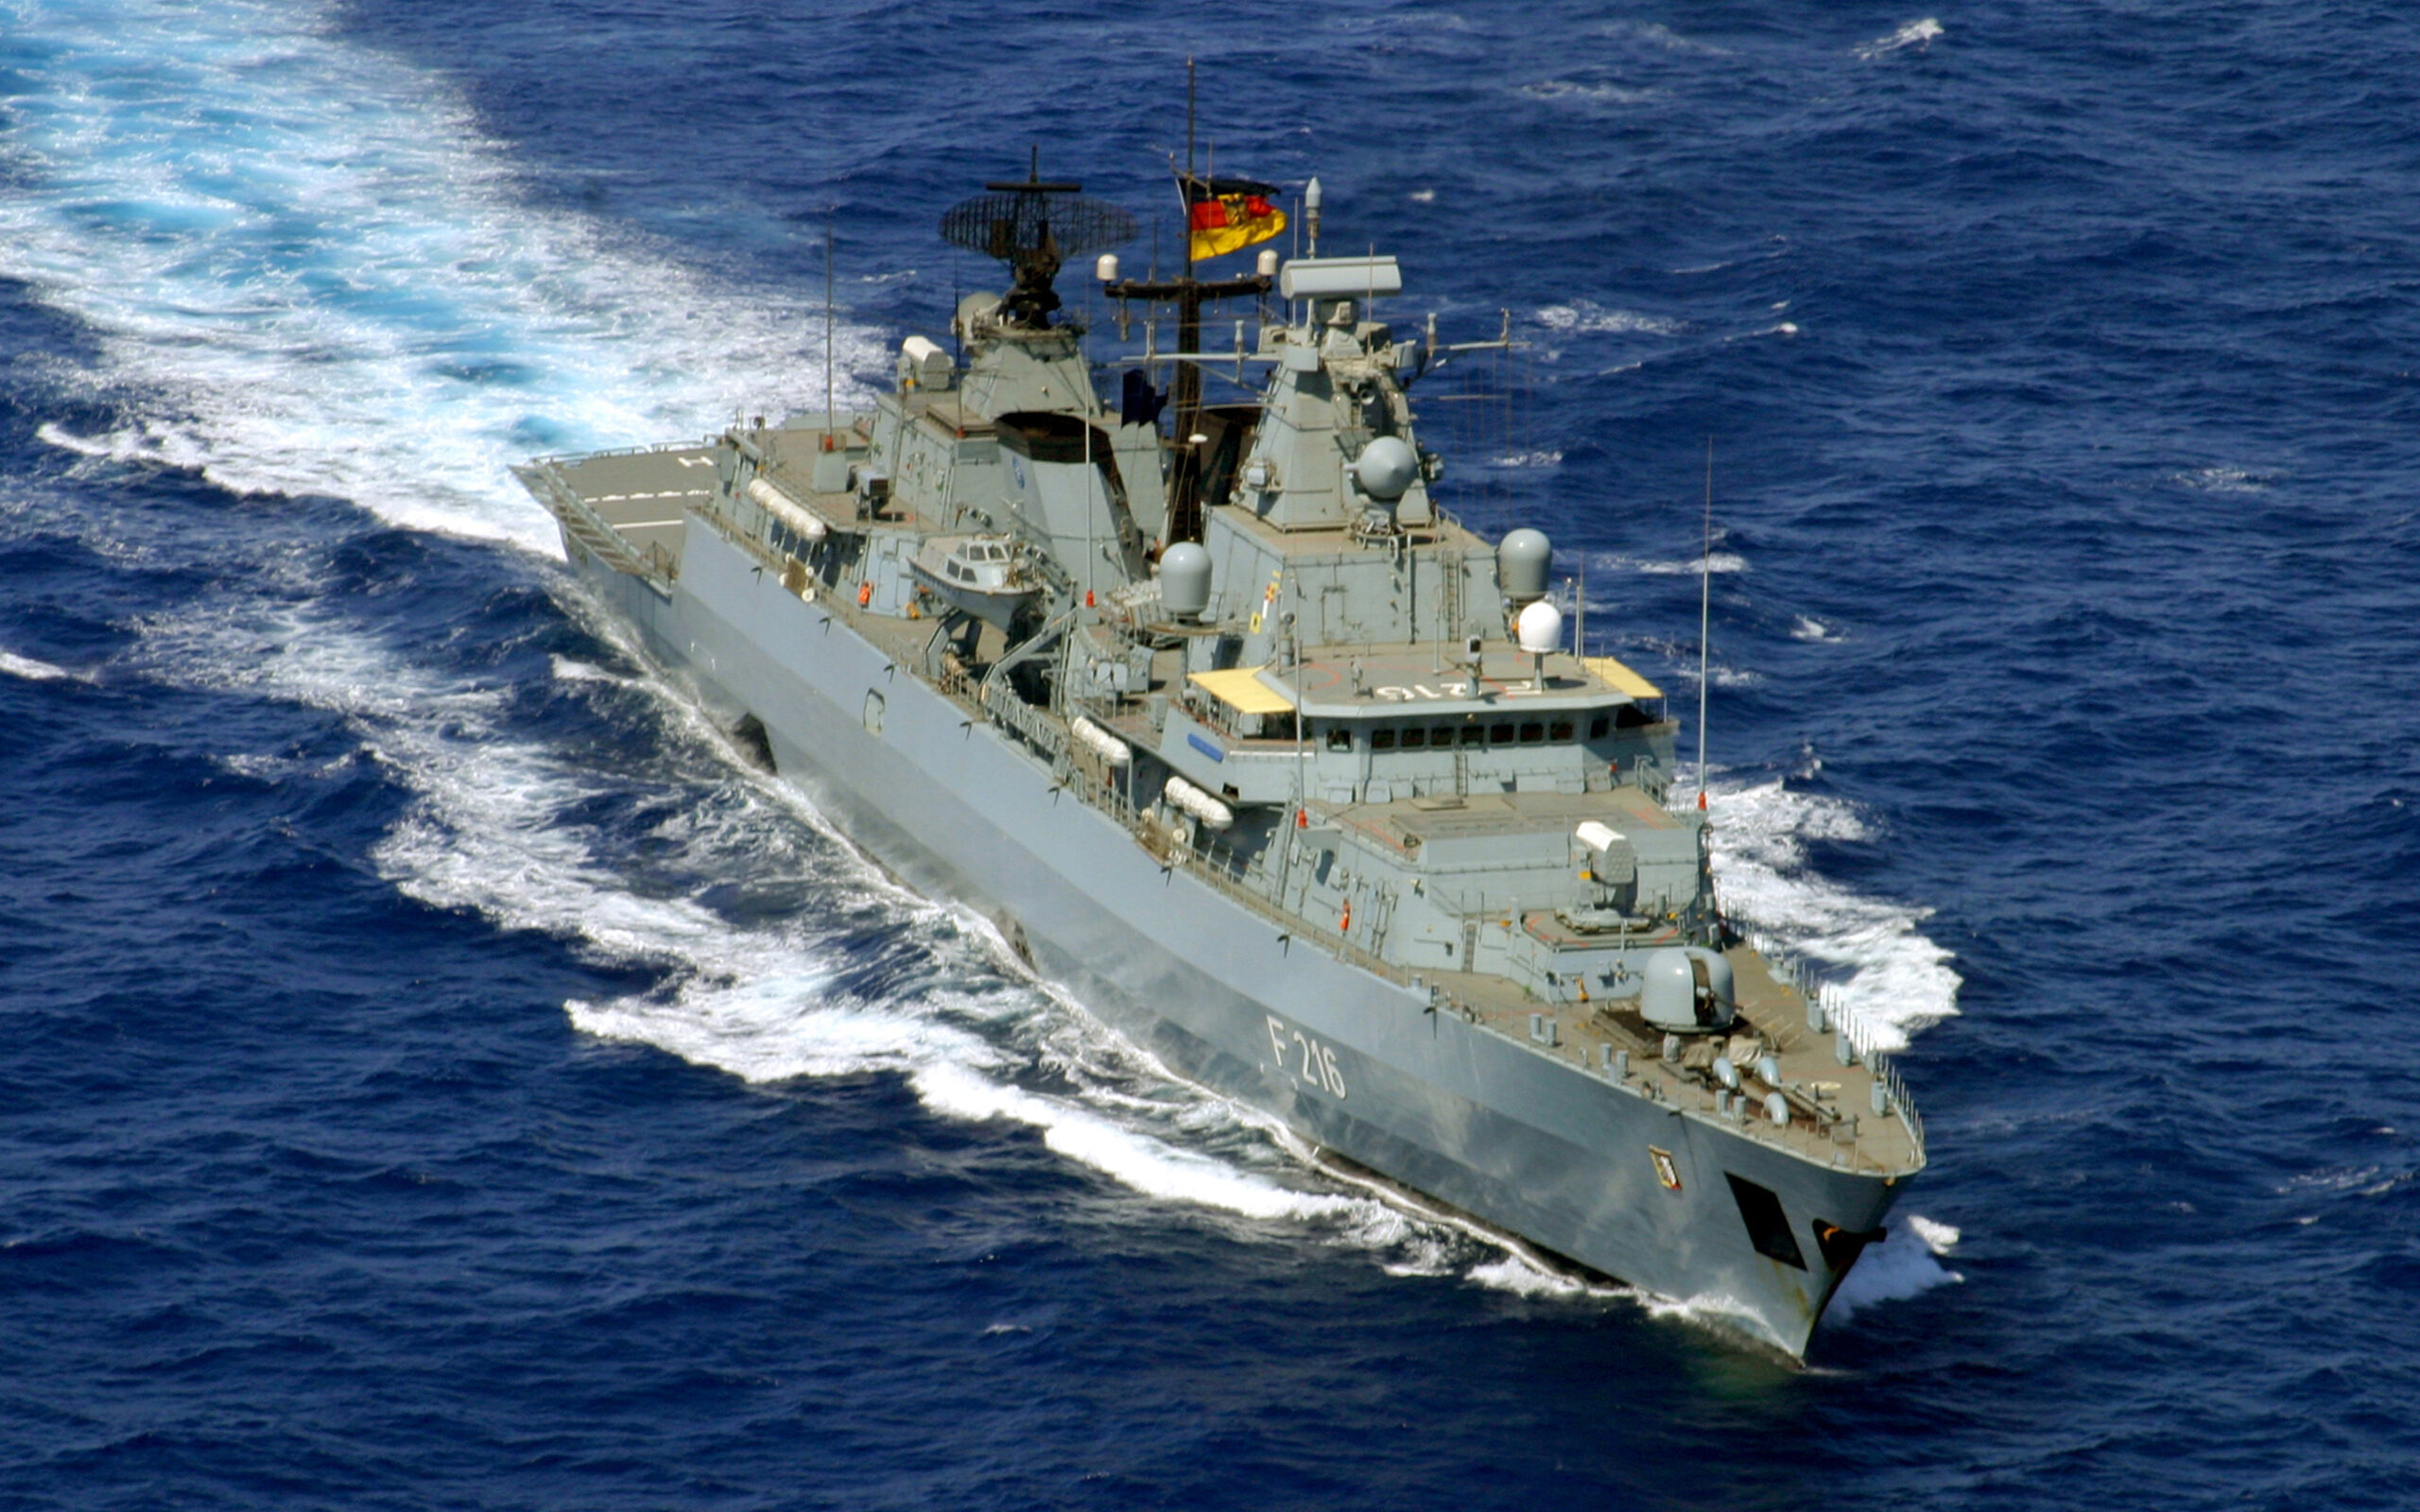 Navy Voyage To The Pacific Demonstrates Germany’s Intent To Be Global Military Power